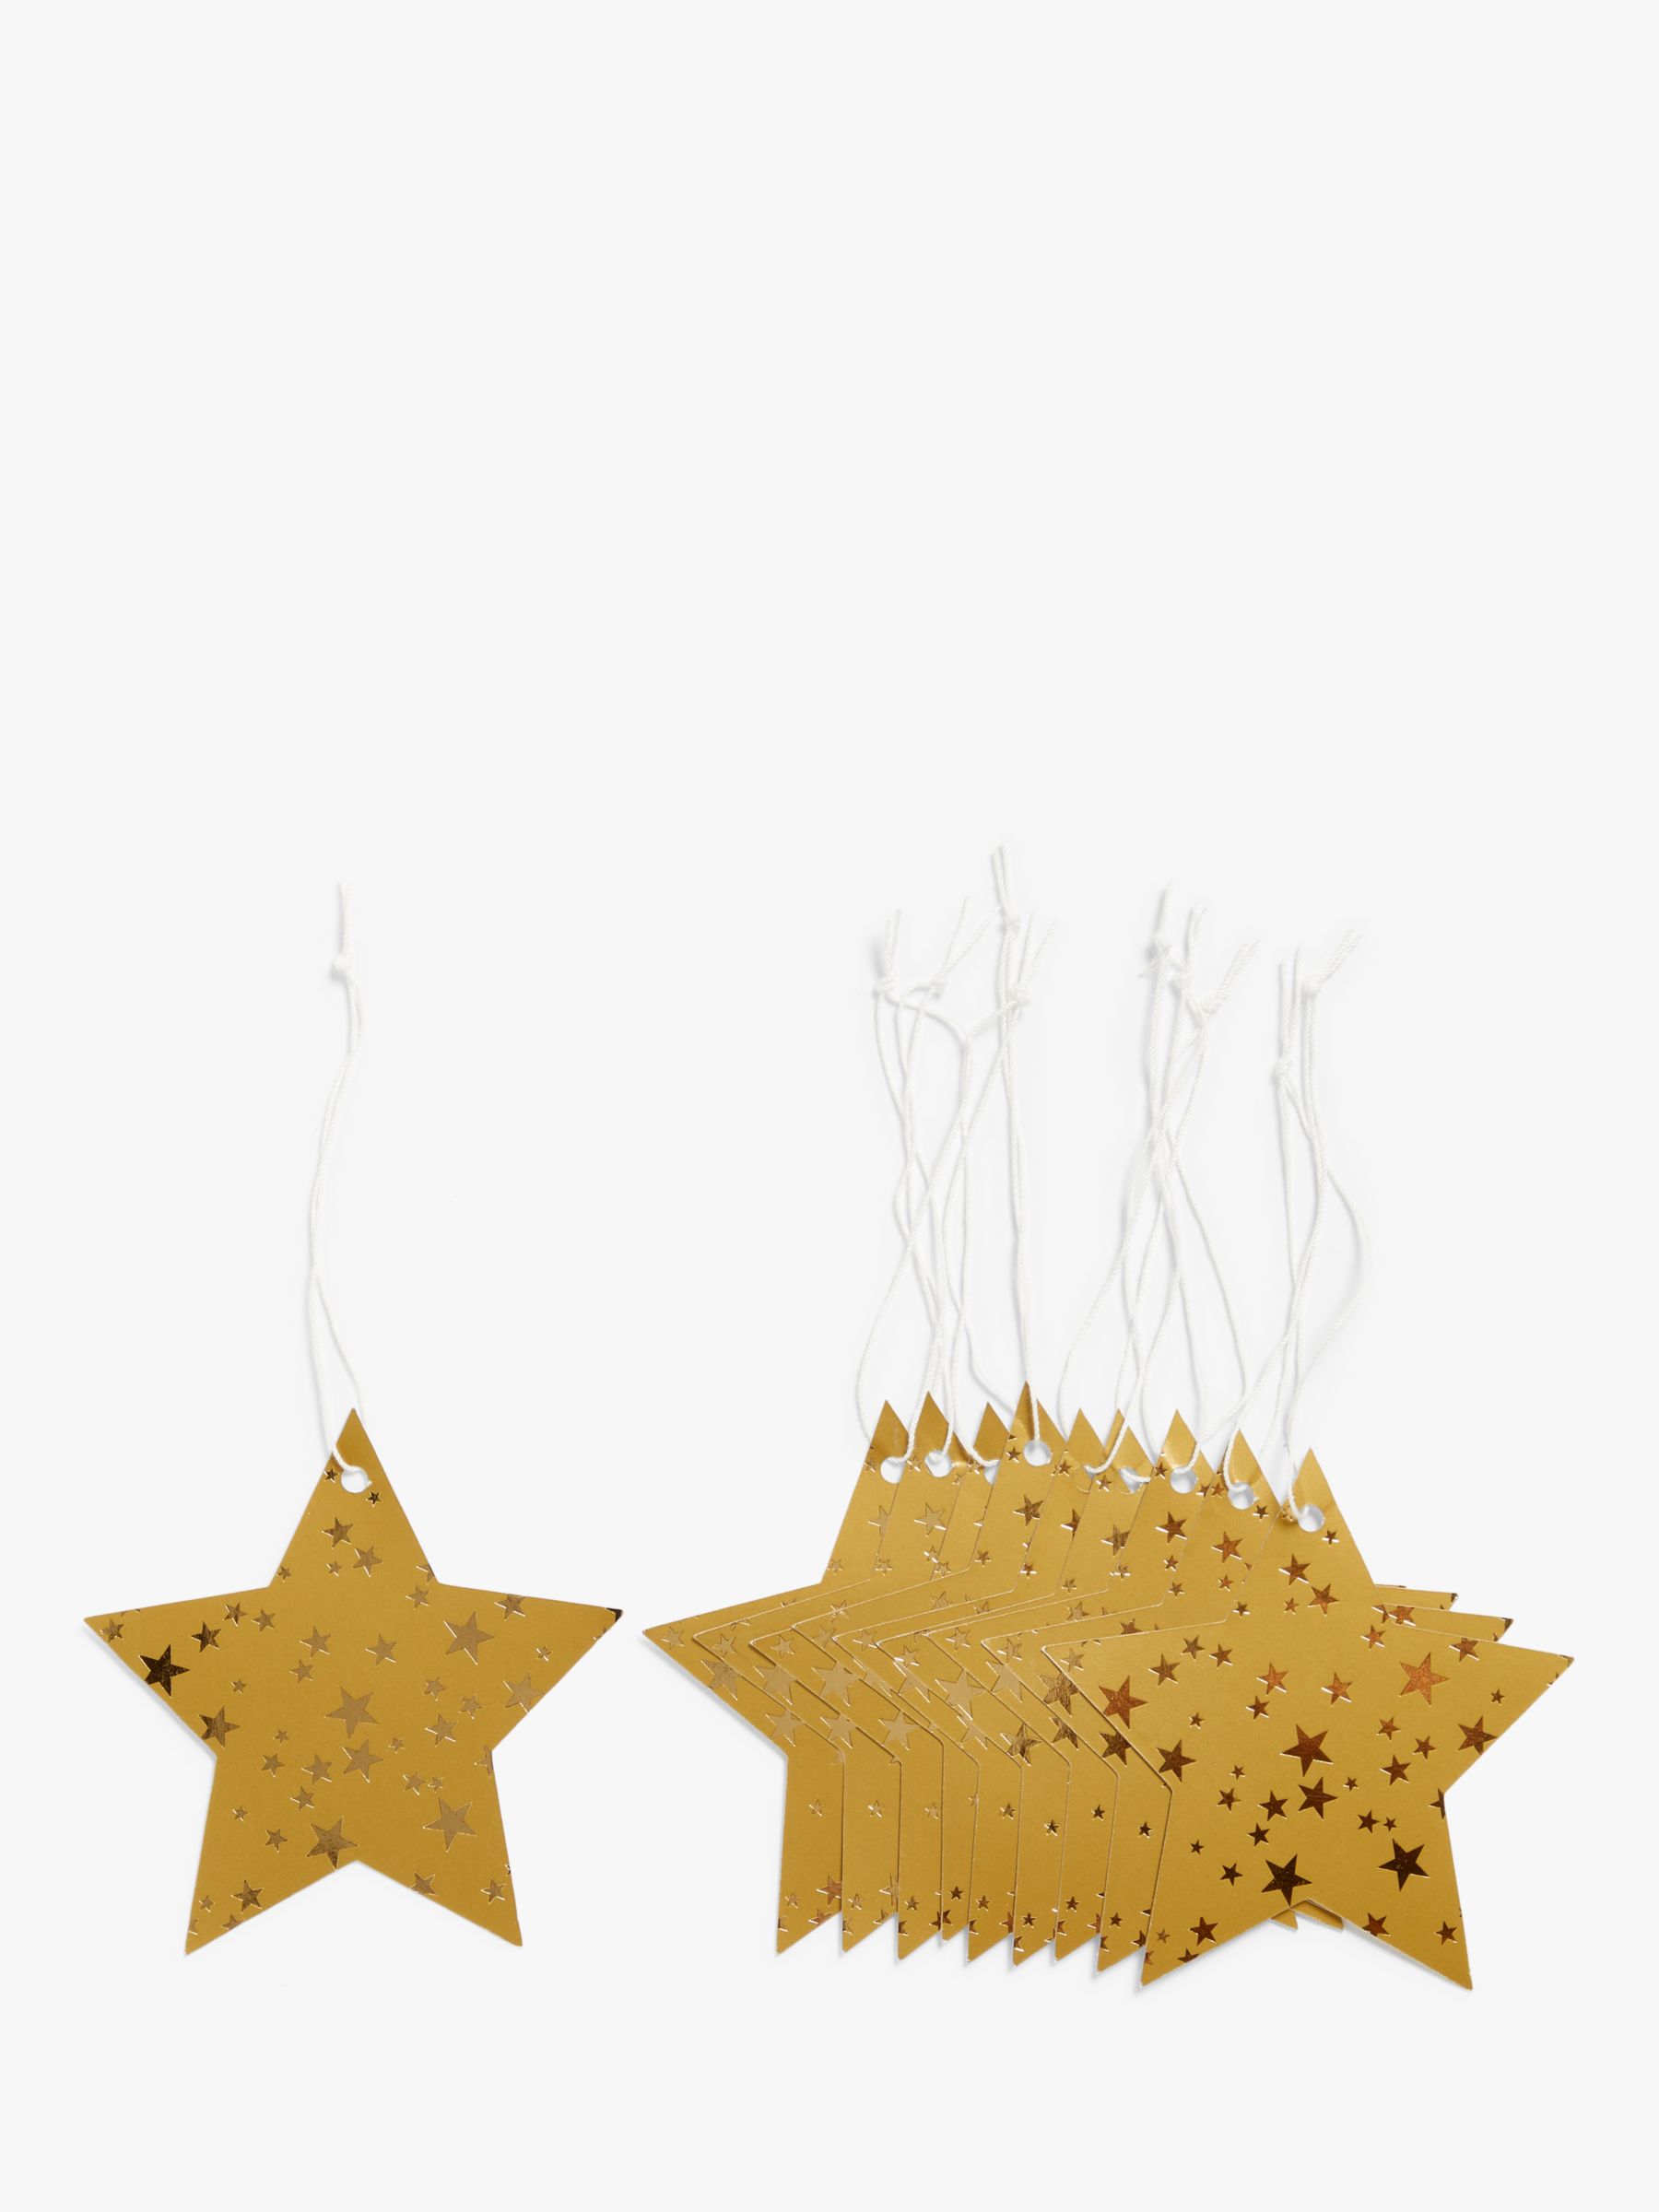 John Lewis Technicolour Supernature Star Gift Tags, Pack of 10